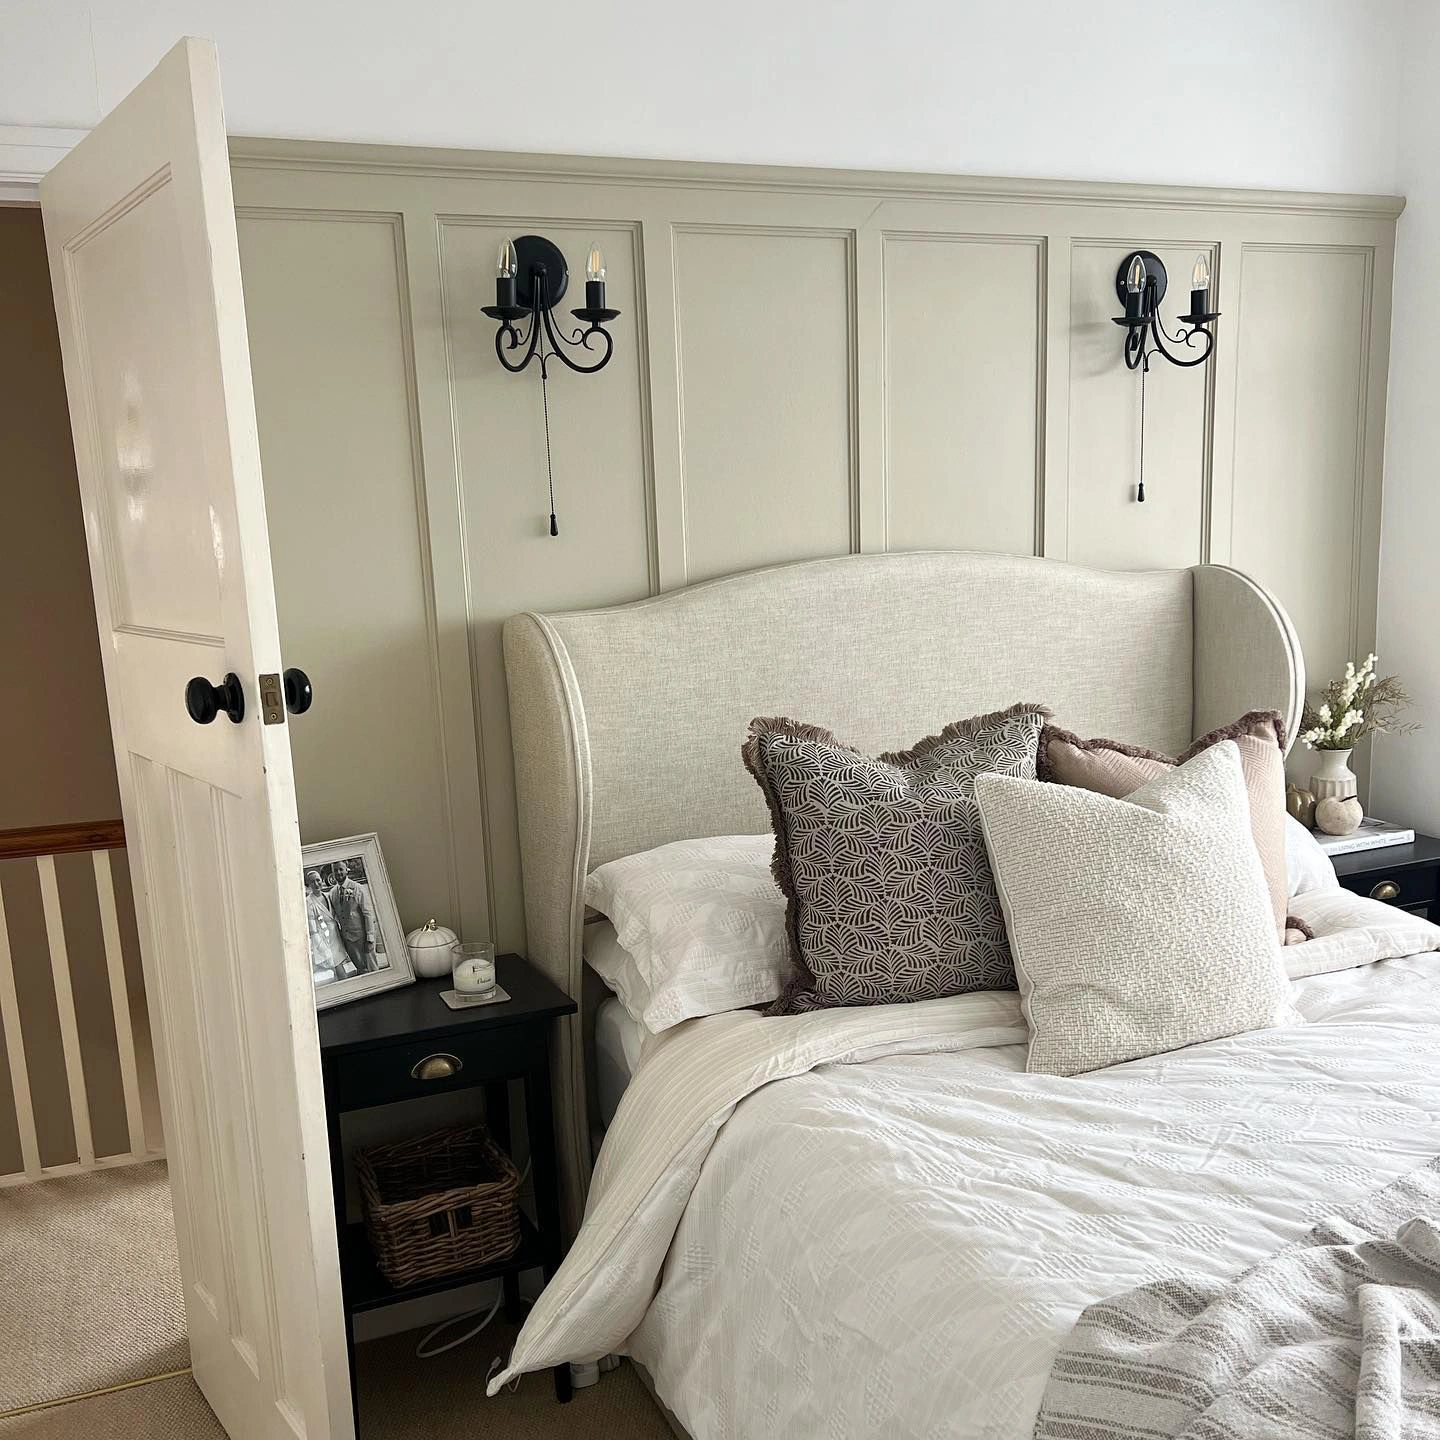 Farrow and Ball Old White 4 bedroom